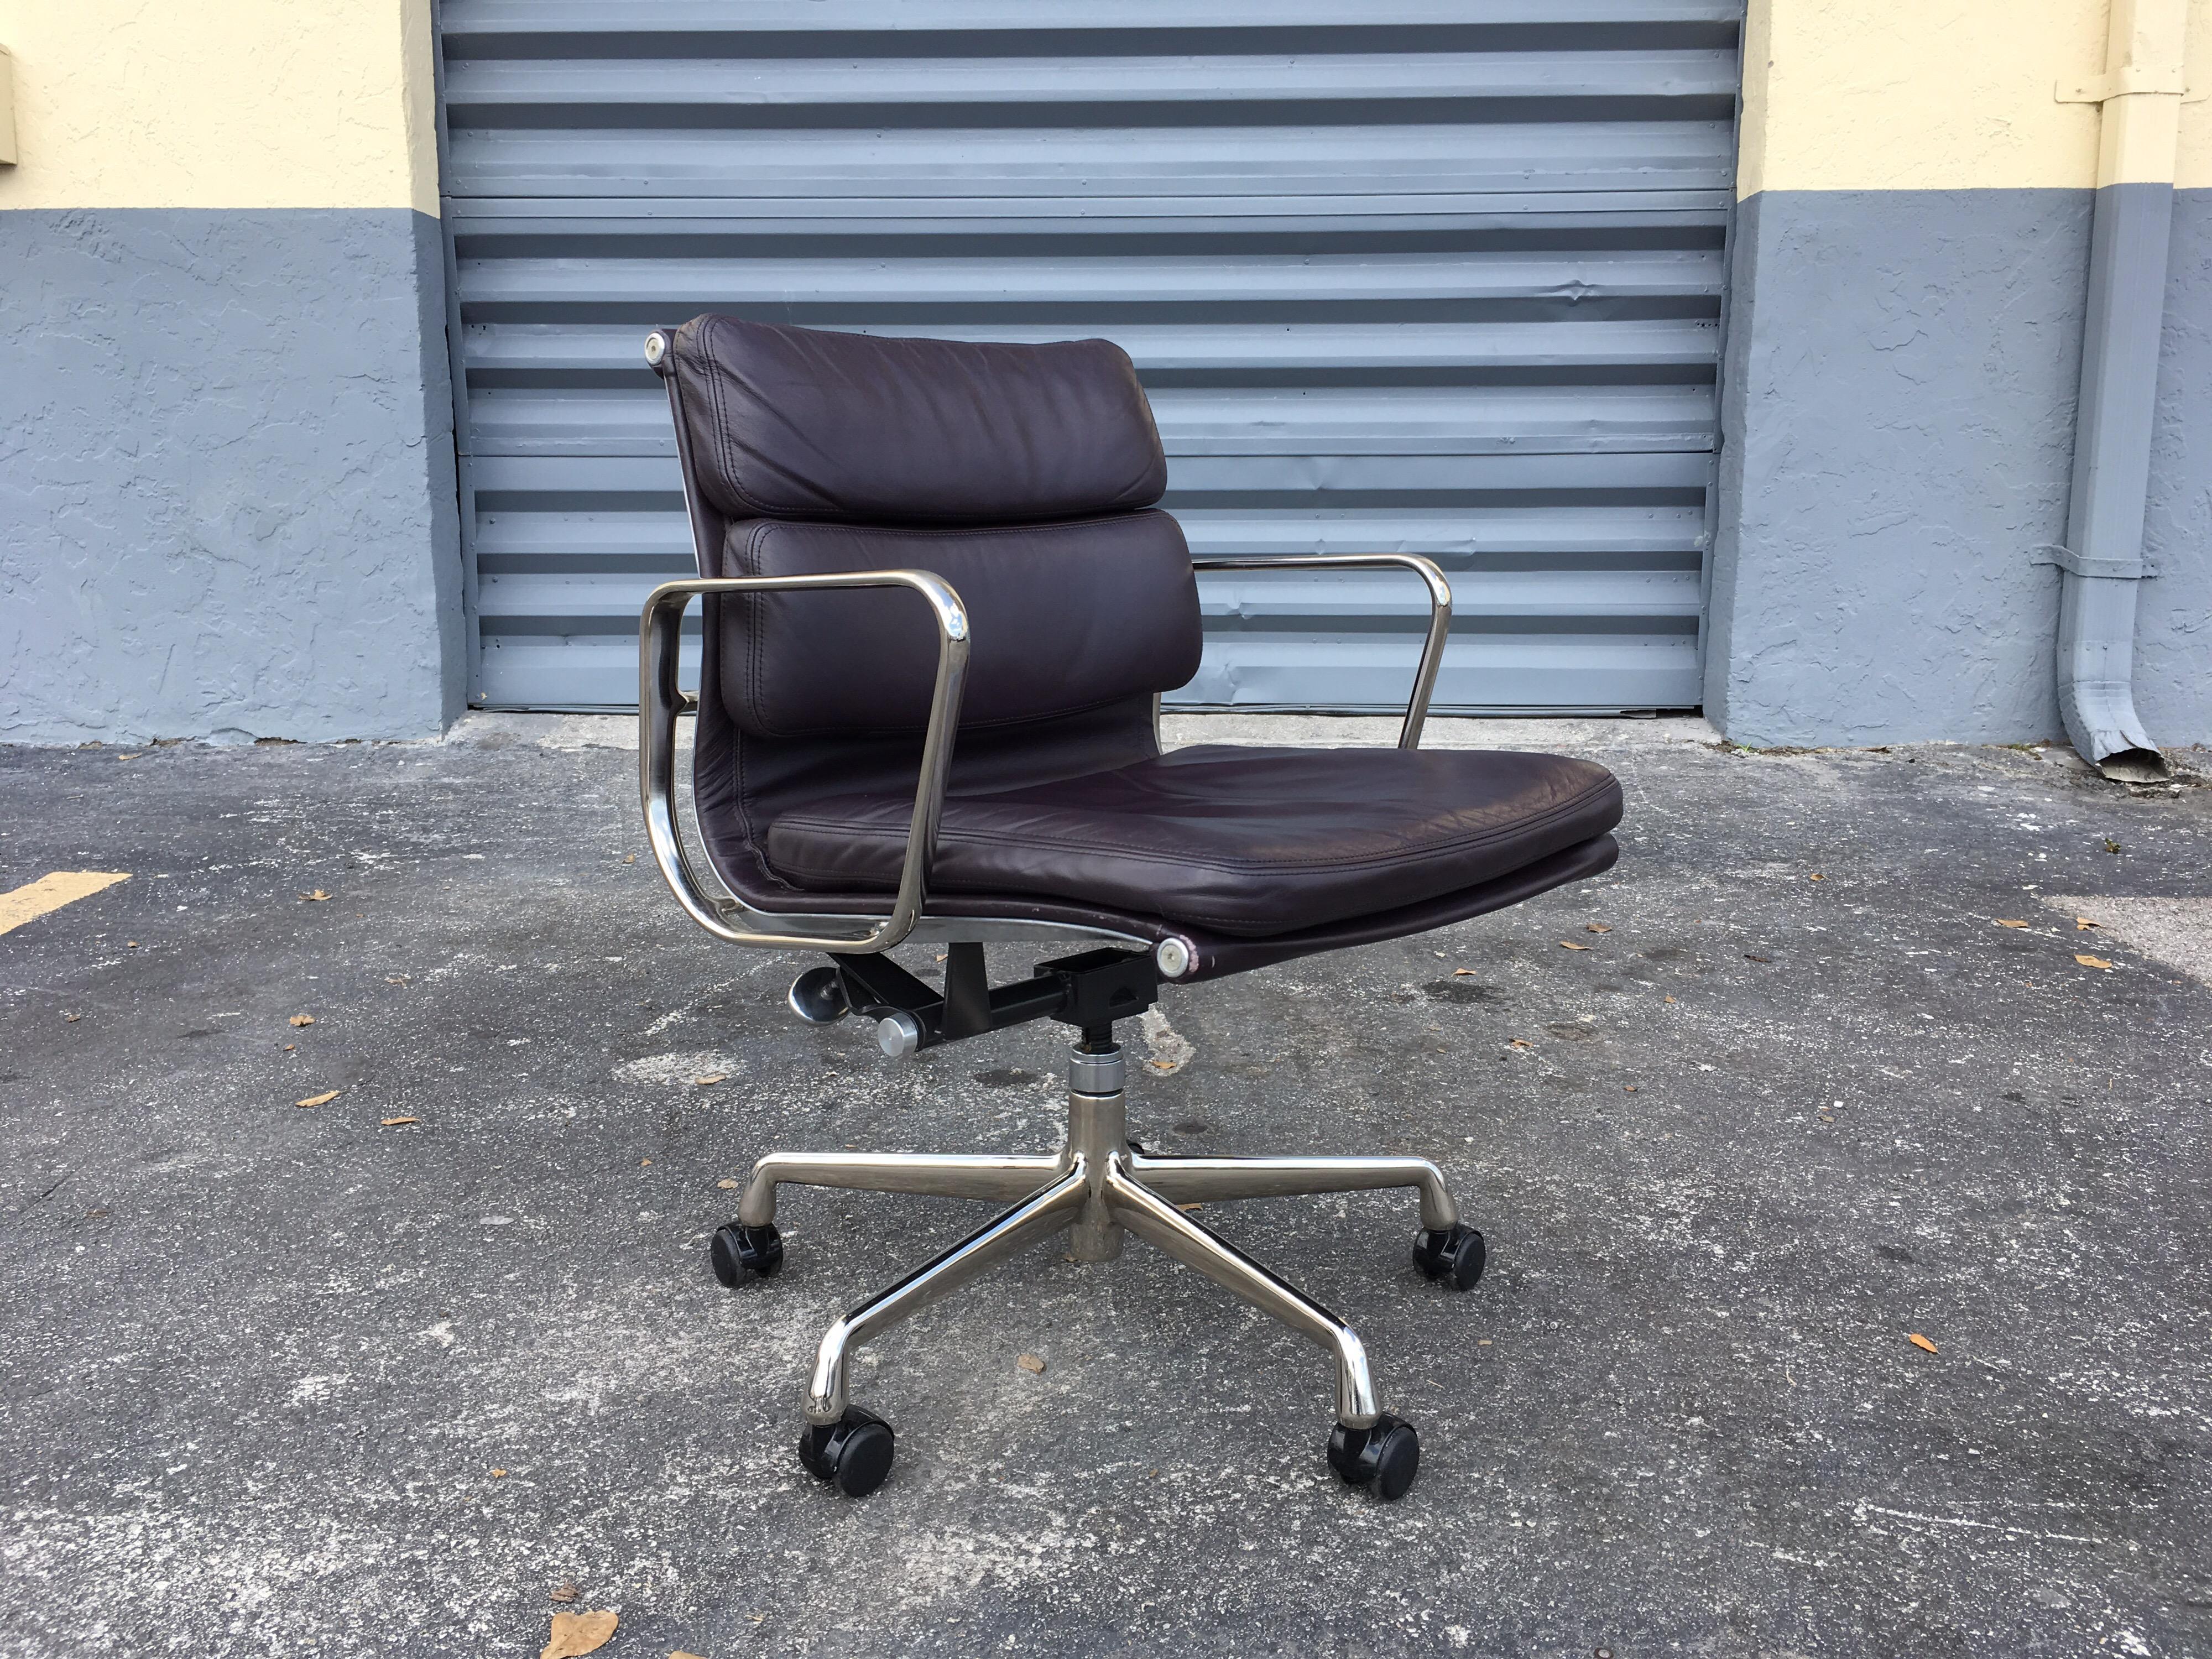 Beautiful Eames soft pad chair for Herman Miller.
Chair has a rare dark aubergine color leather and a chrome finish, swivels, tilts and on casters.
Measures: Seat height is adjustable 19.75”, 22.50”.